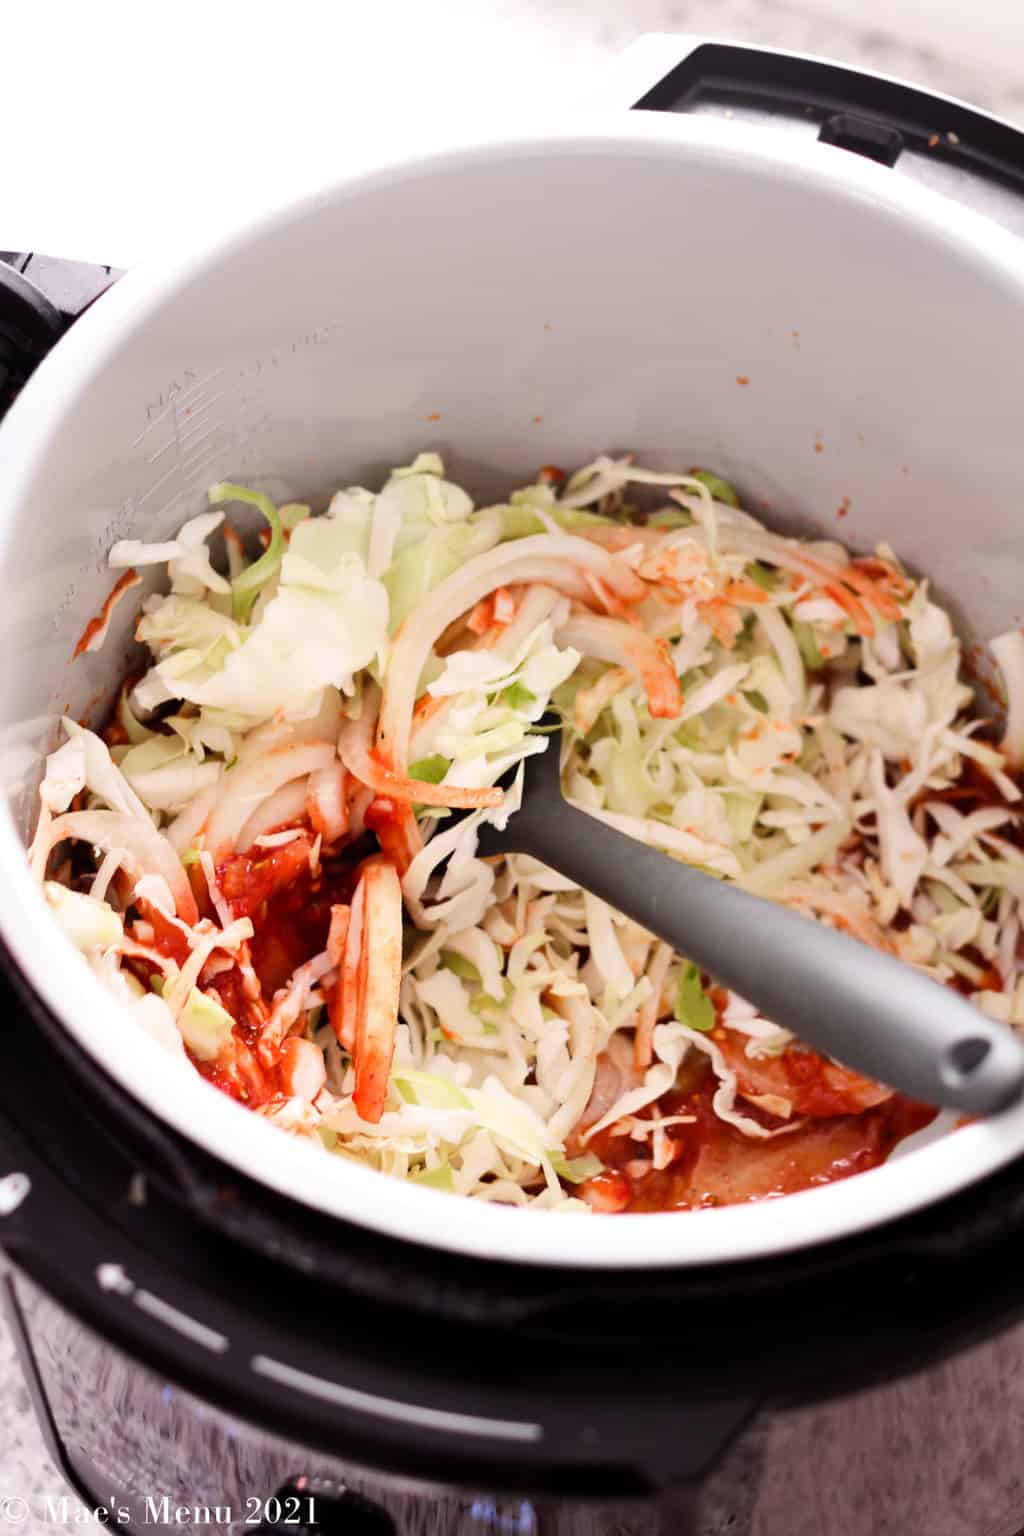 stirring shredded cabbage into the salsa mix